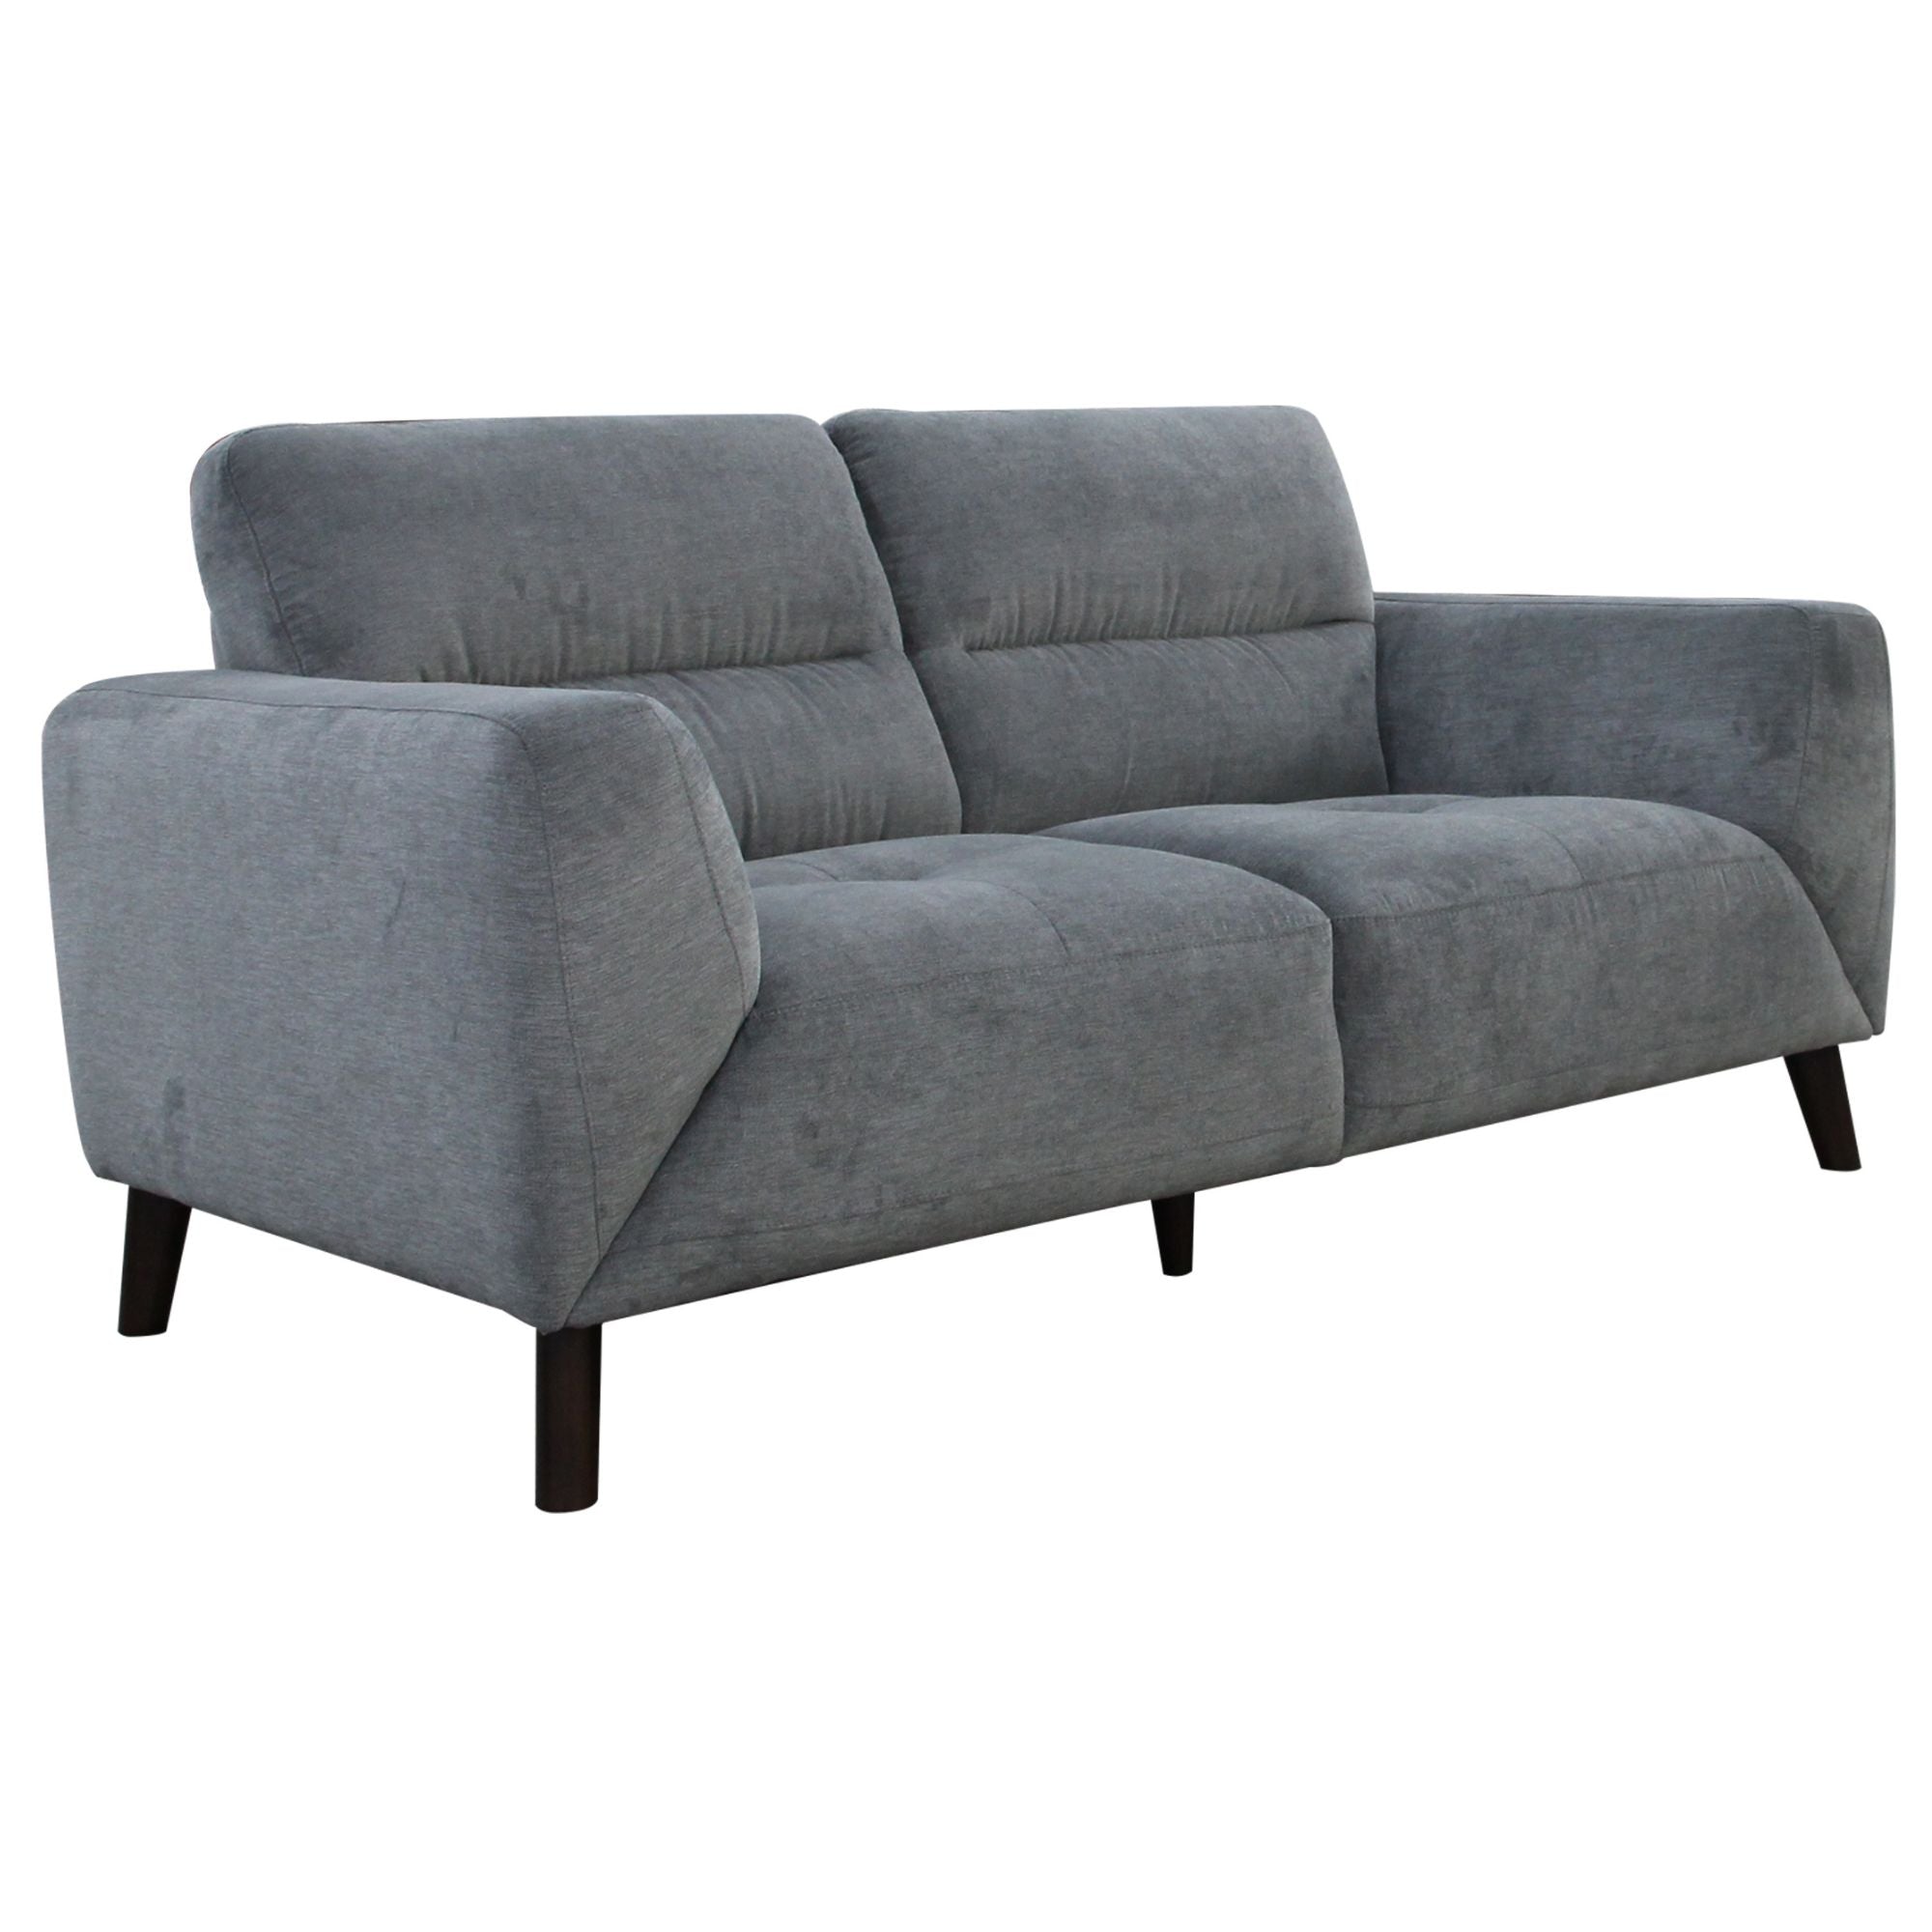 Monarch 2 Seater Sofa Fabric Uplholstered Lounge Couch - Charcoal.